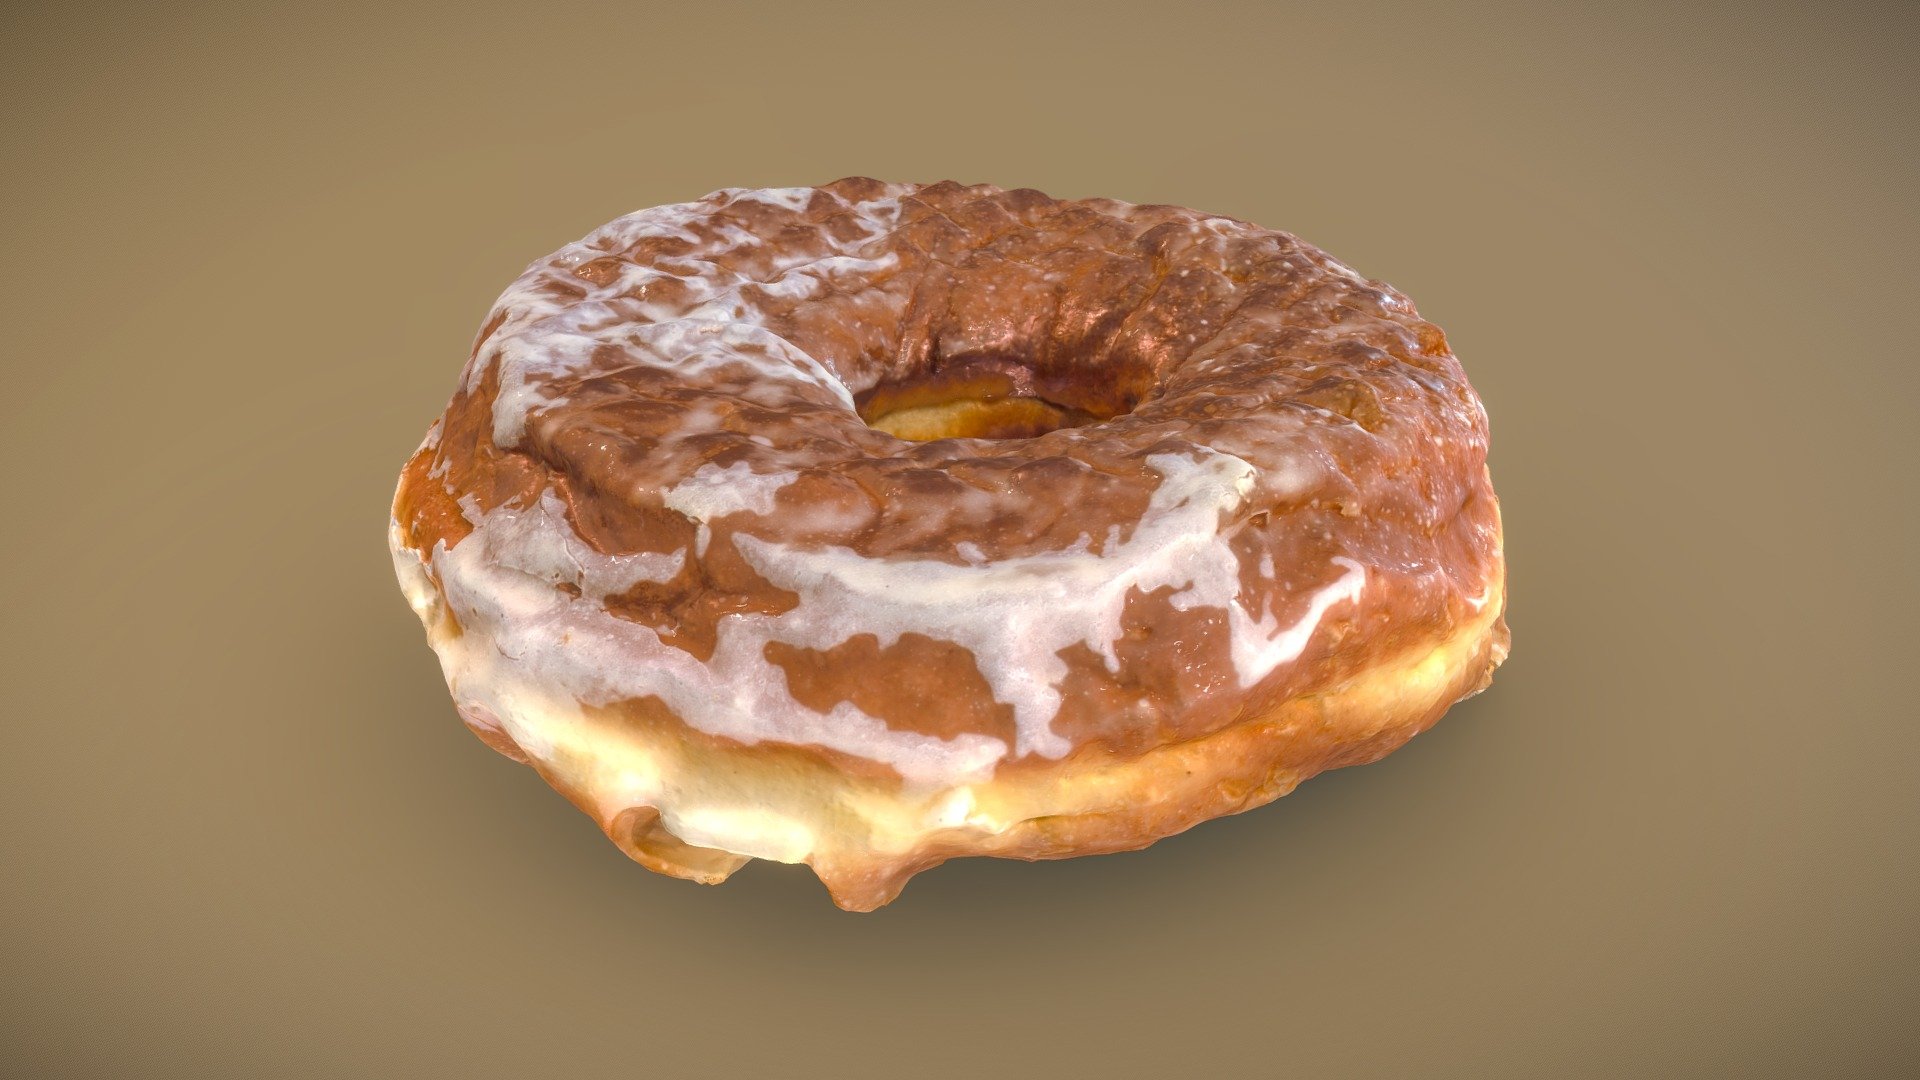 Vanilla Bean doughnut from Doughnut Plant in NYC

3D scanned with a turntable, lots of lights, and a single A7R (391 photos)

Cleanup and retopology to quads in ZBrush. PBR workflow in Photoshop to create specularity and roughness maps.

Low polygon version of model and textures is included

Full textures are 8K x 8K and low poly textures are at 2K x 2K - Doughnut Plant Vanilla Bean - Buy Royalty Free 3D model by omegadarling 3d model